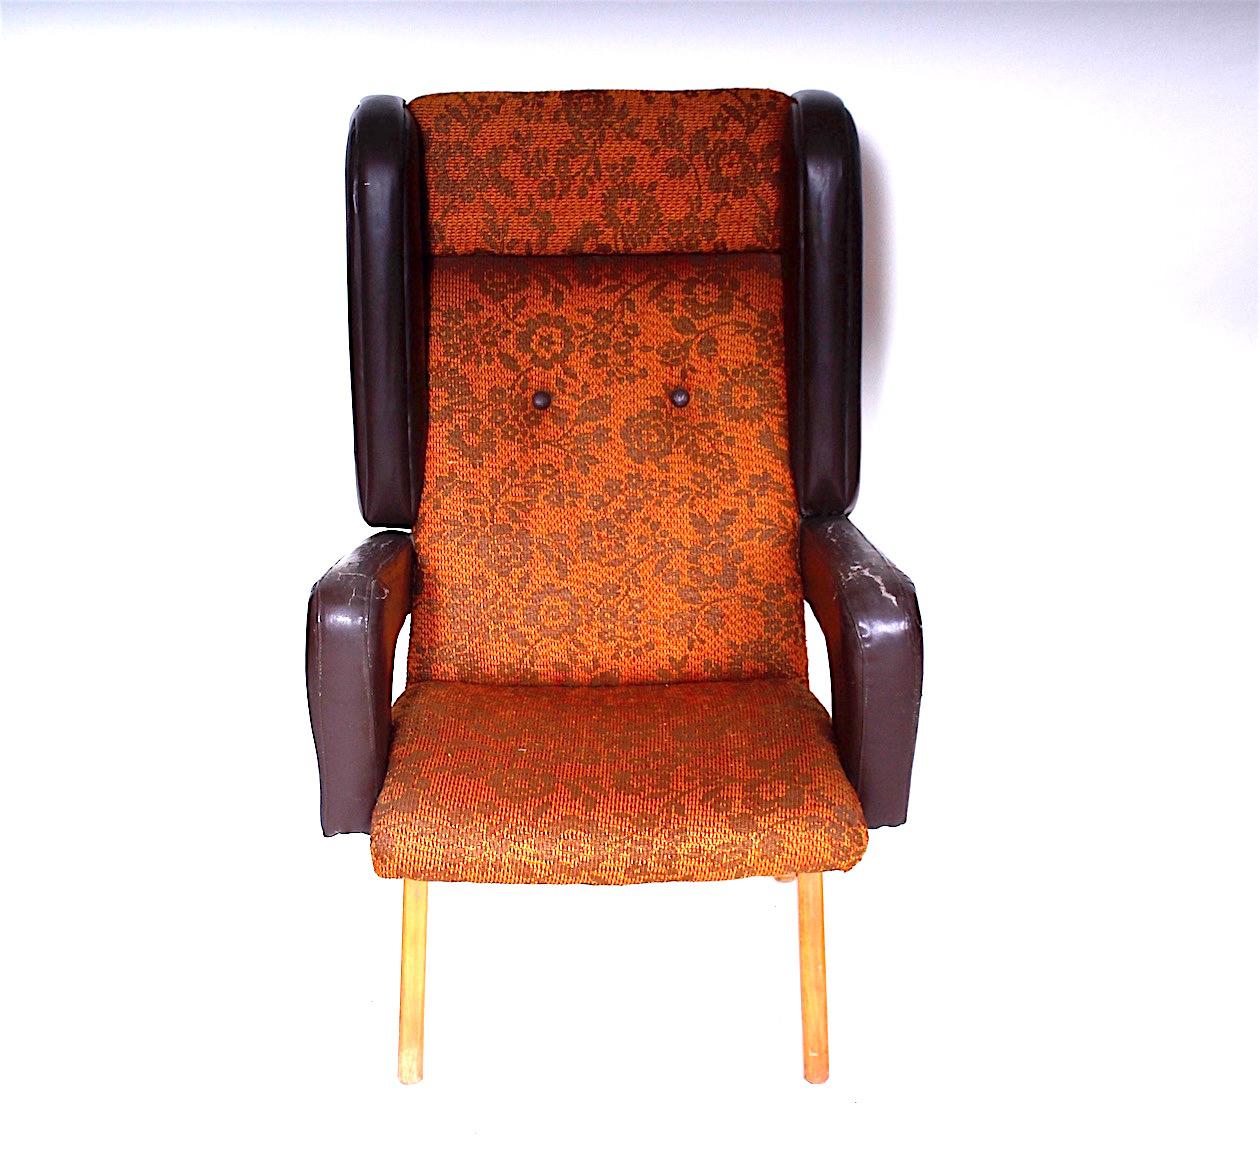 - Made in Czechoslovakia
- Made of wood, fabric
- Suitable for reupholstered
- Good, original condition.